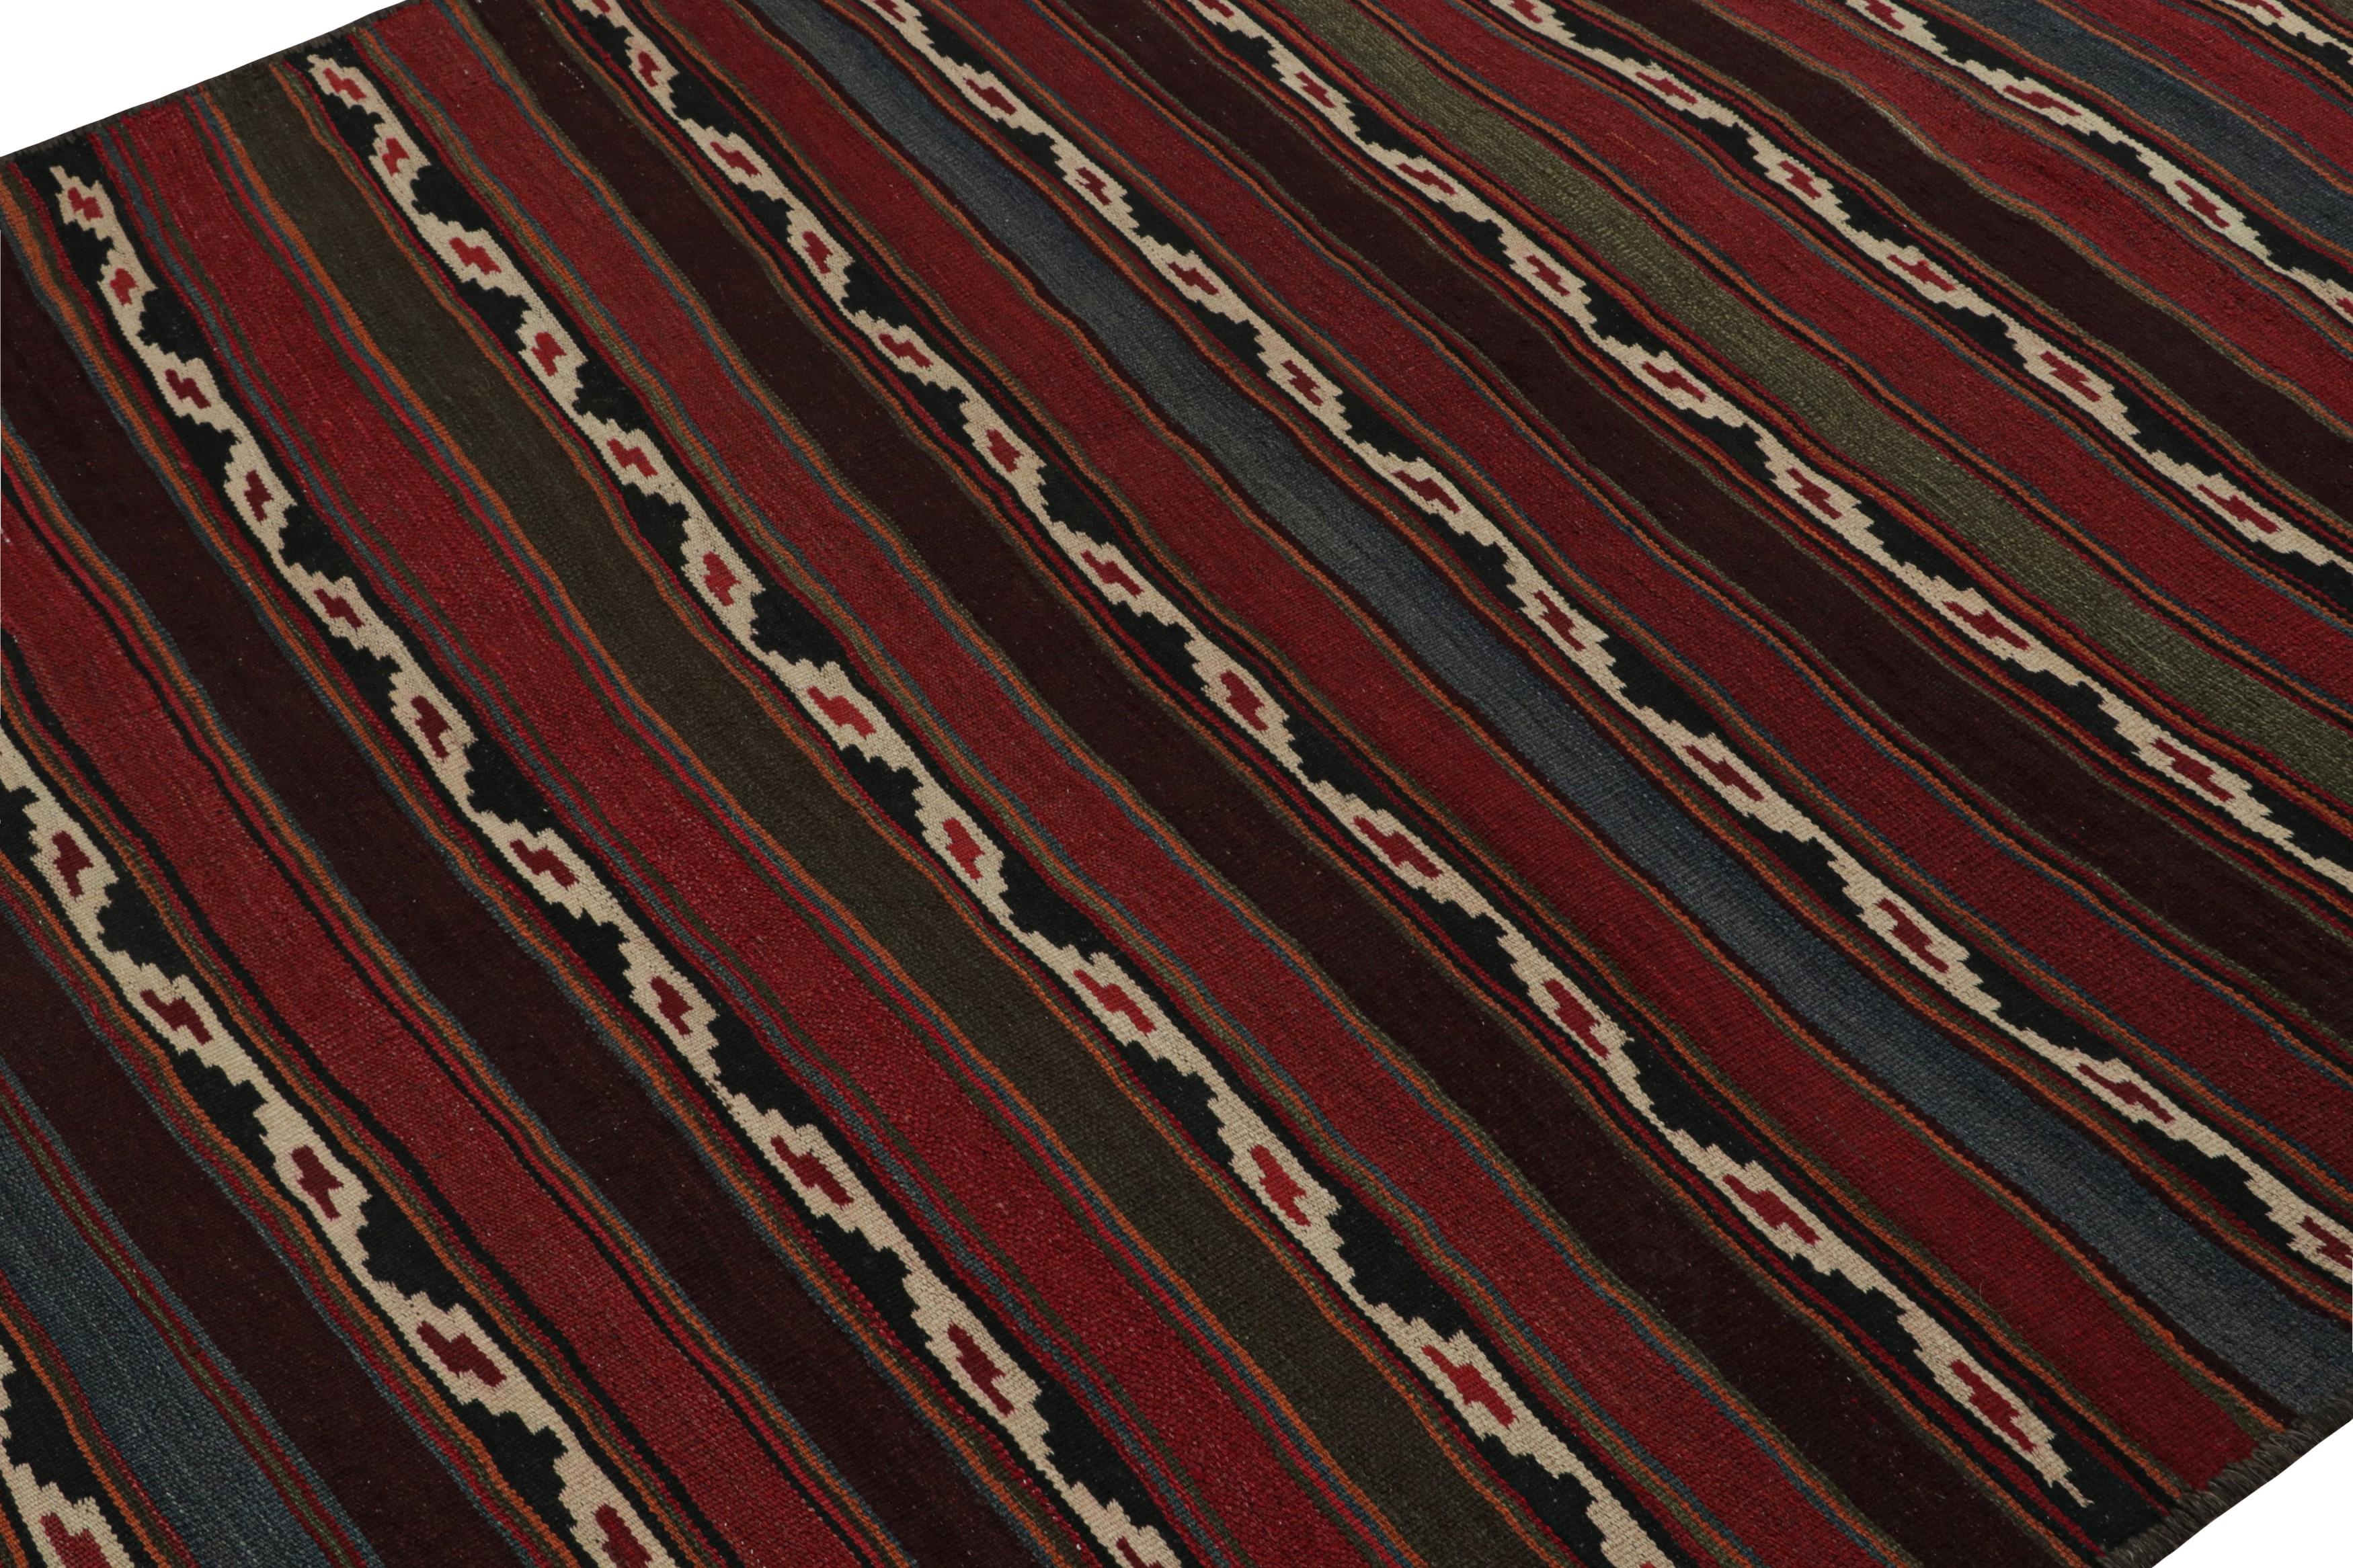 Hand-Woven Vintage Afghani tribal Kilim Rug, with Red and Blue Stripes, from Rug & Kilim For Sale